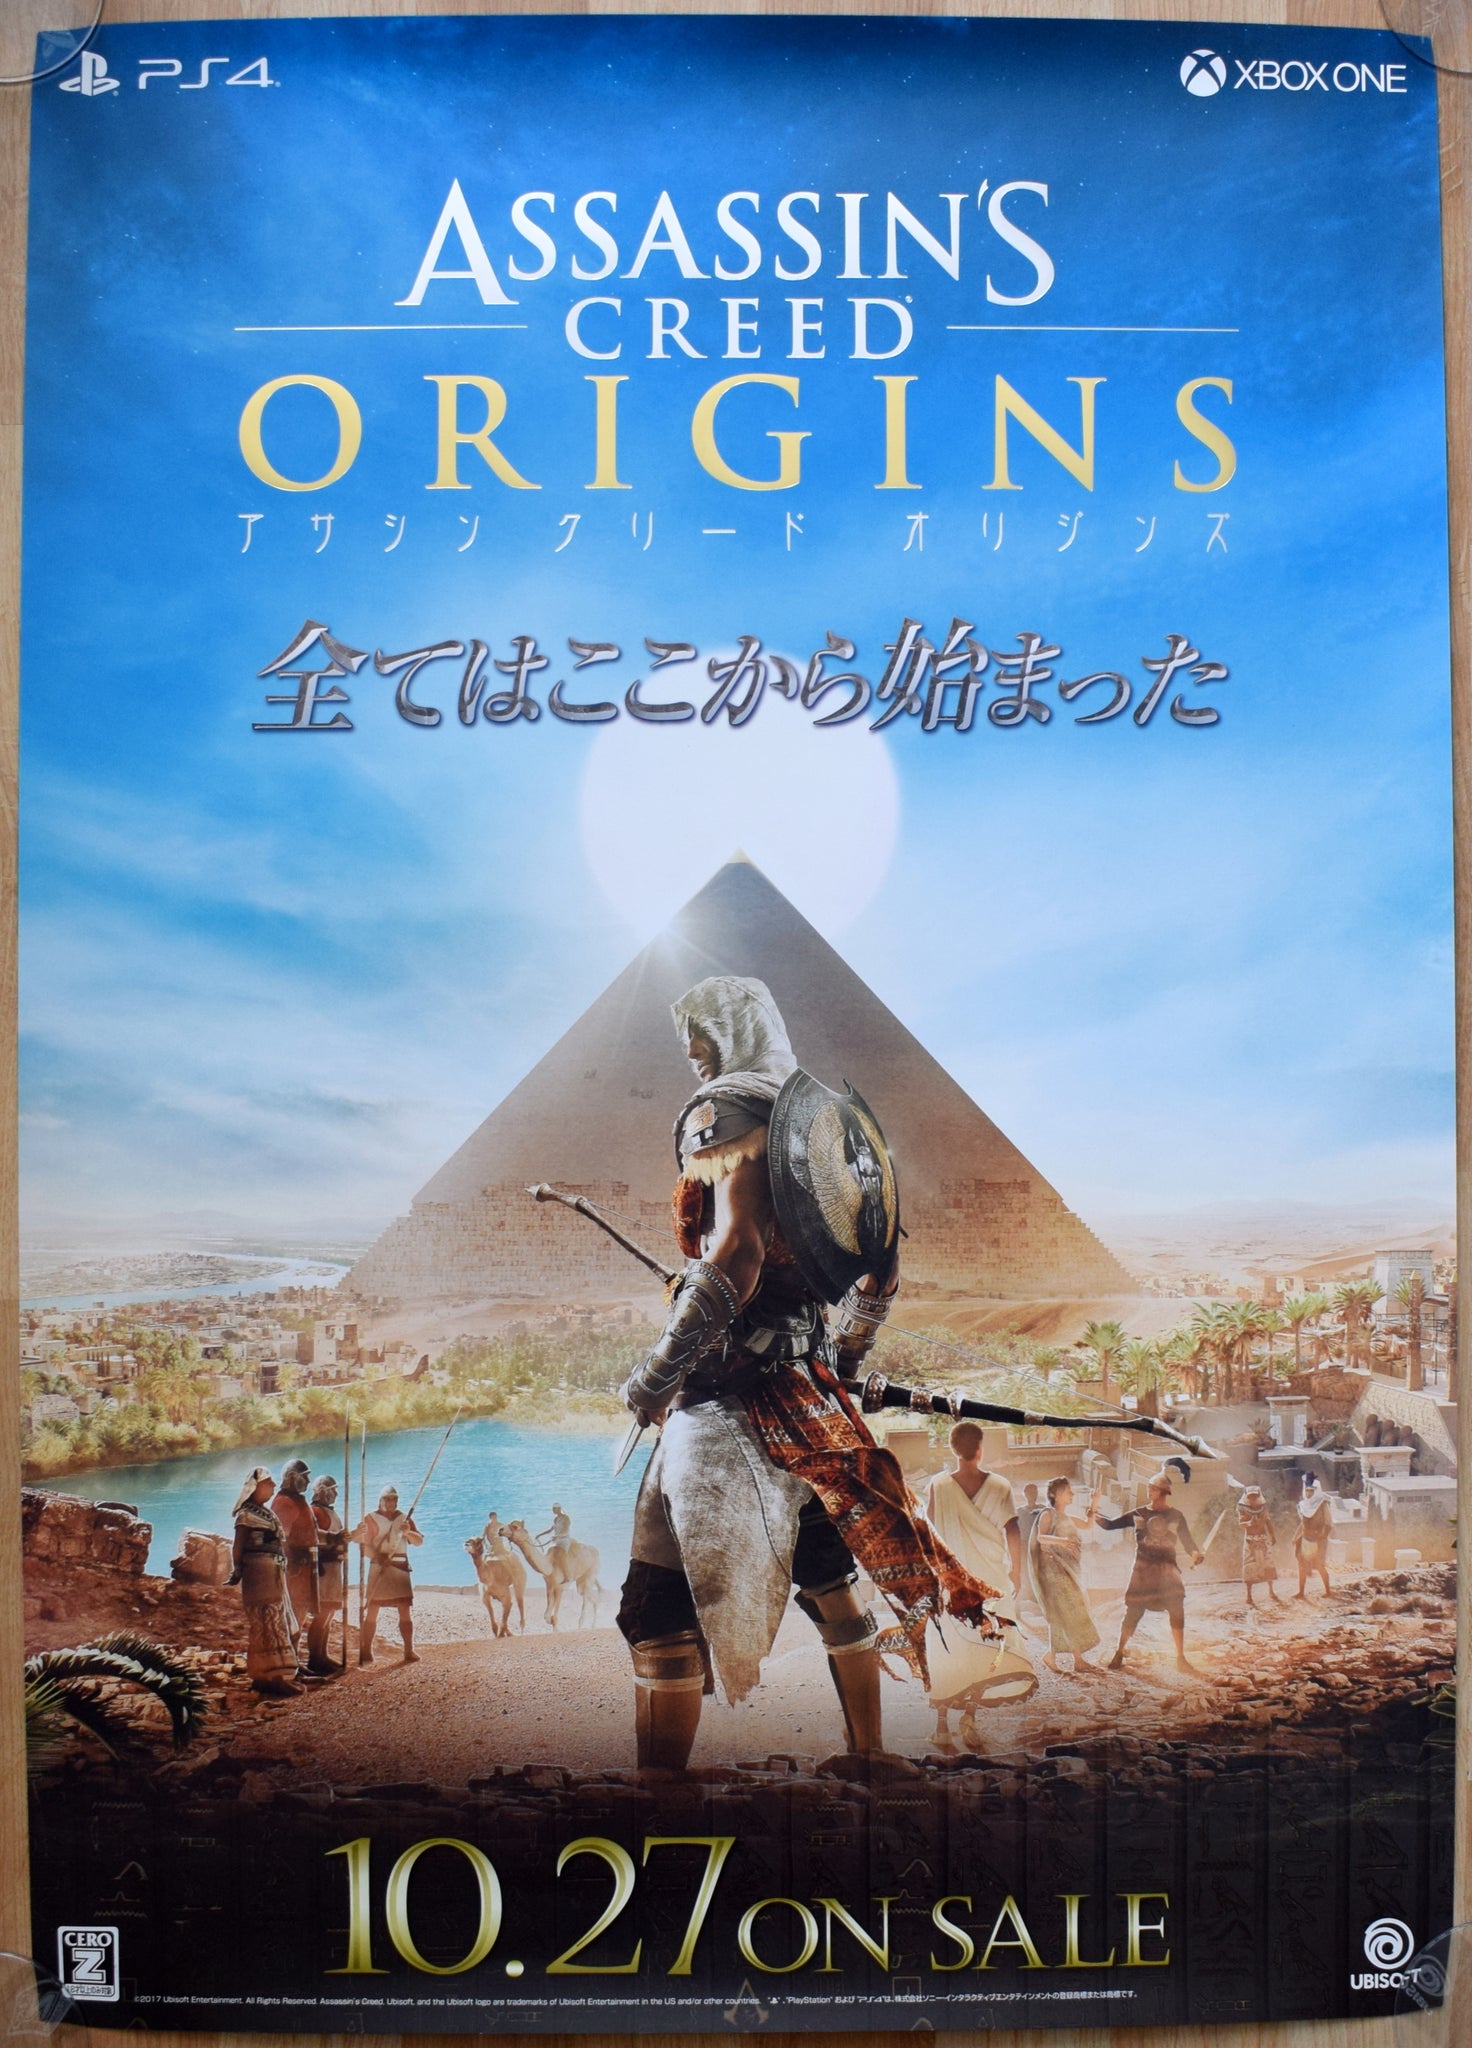 Assassin's Creed: Origins (B2) Japanese Promotional Poster #1